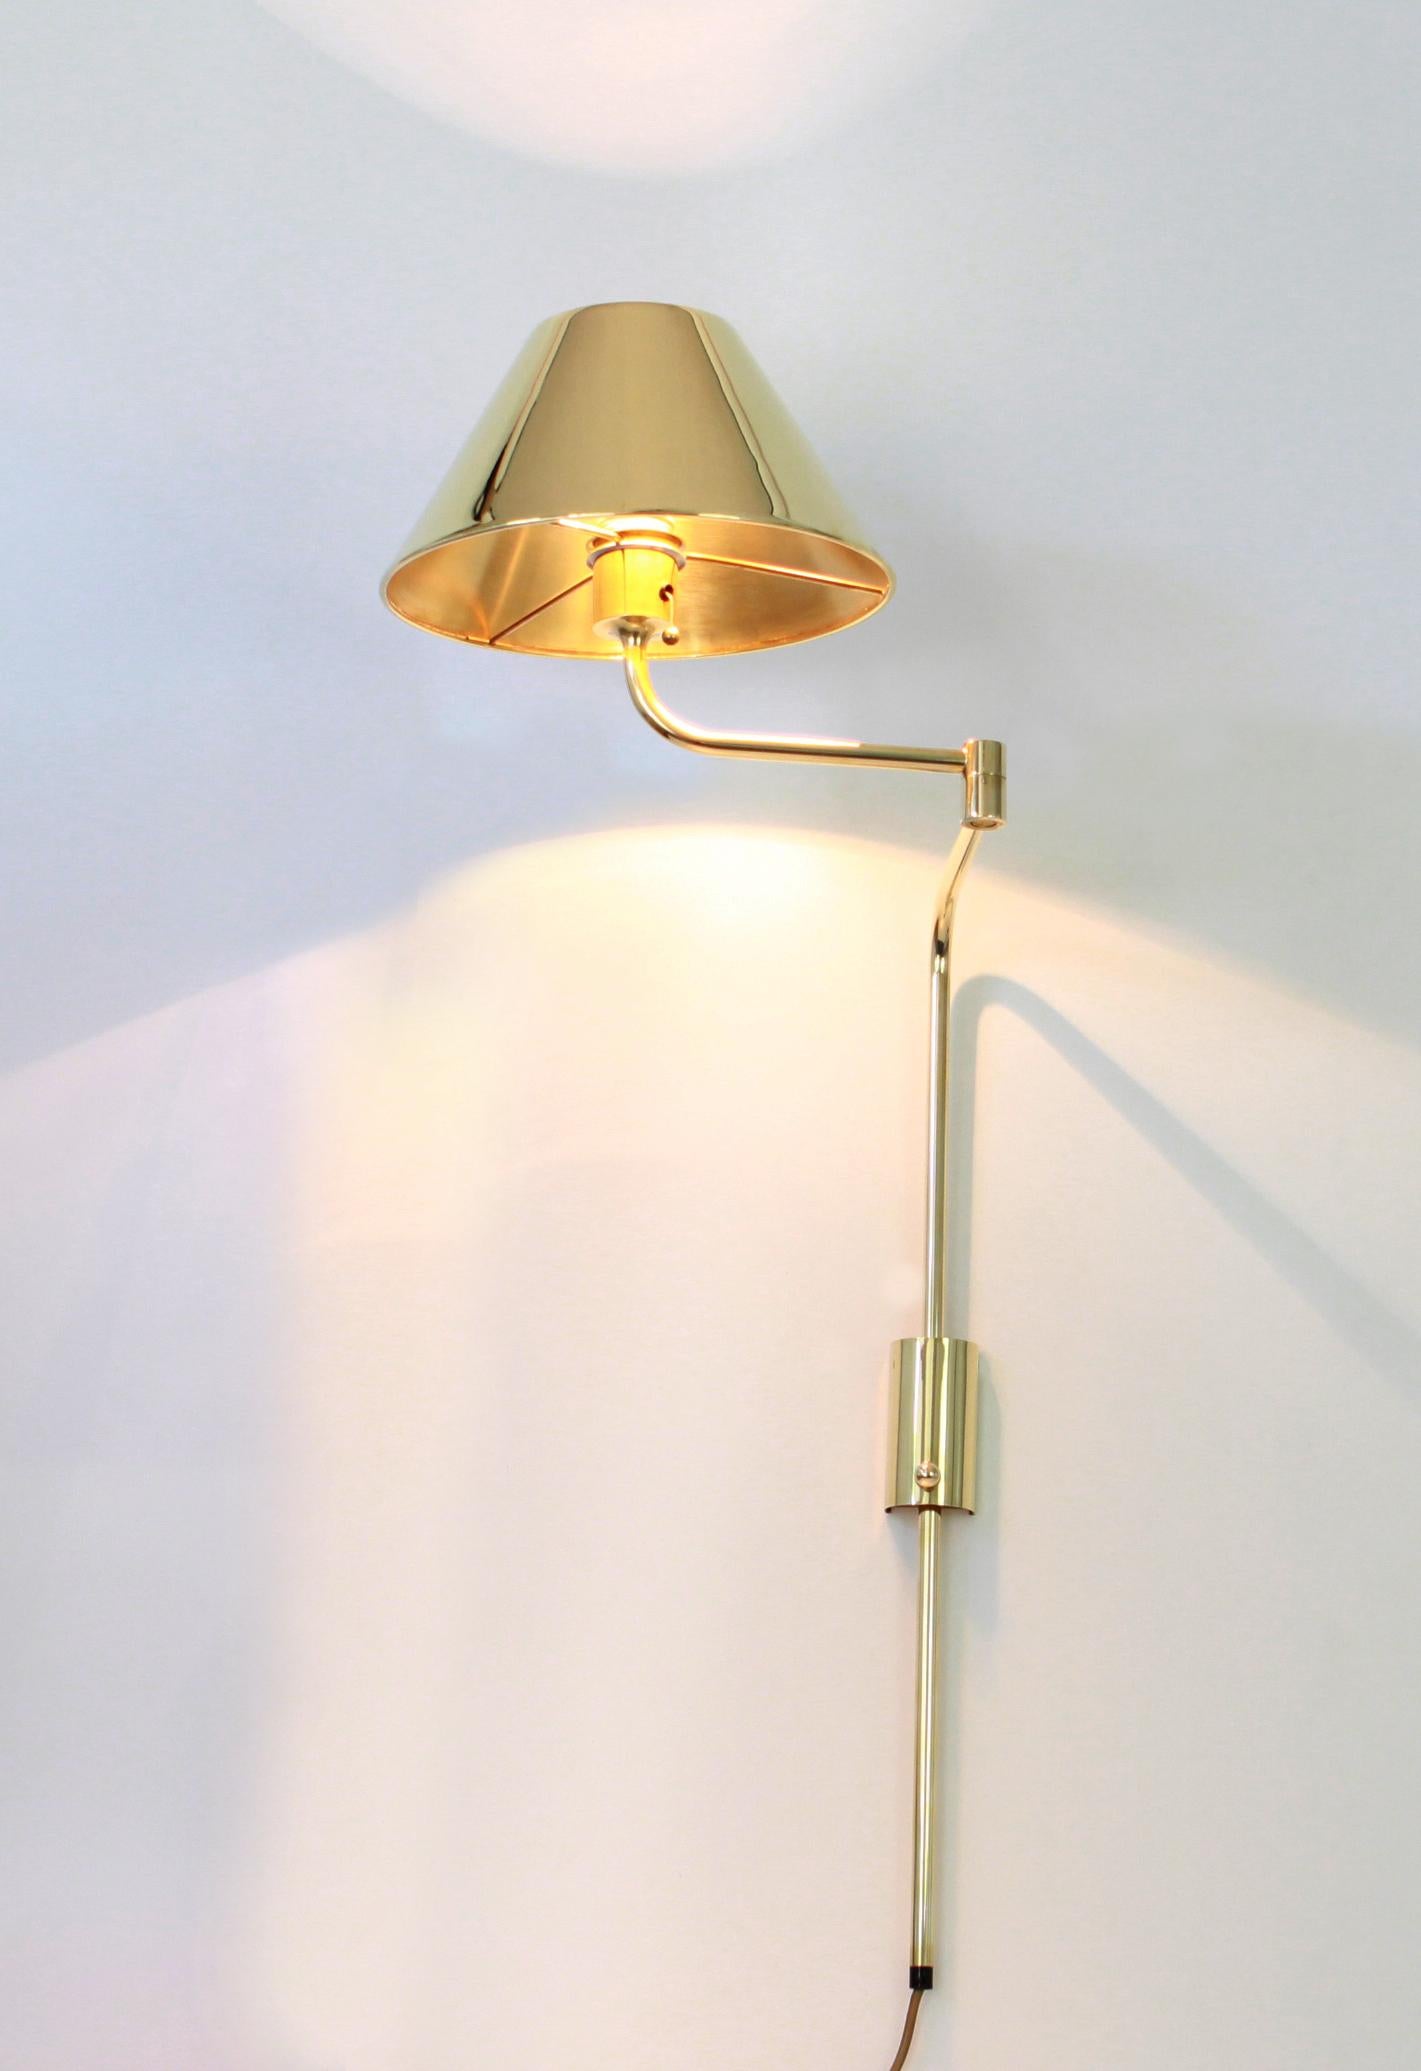 Mid-Century Modern Midcentury Designer Brass Wall Sconces by Florian Schulz, 1980s For Sale